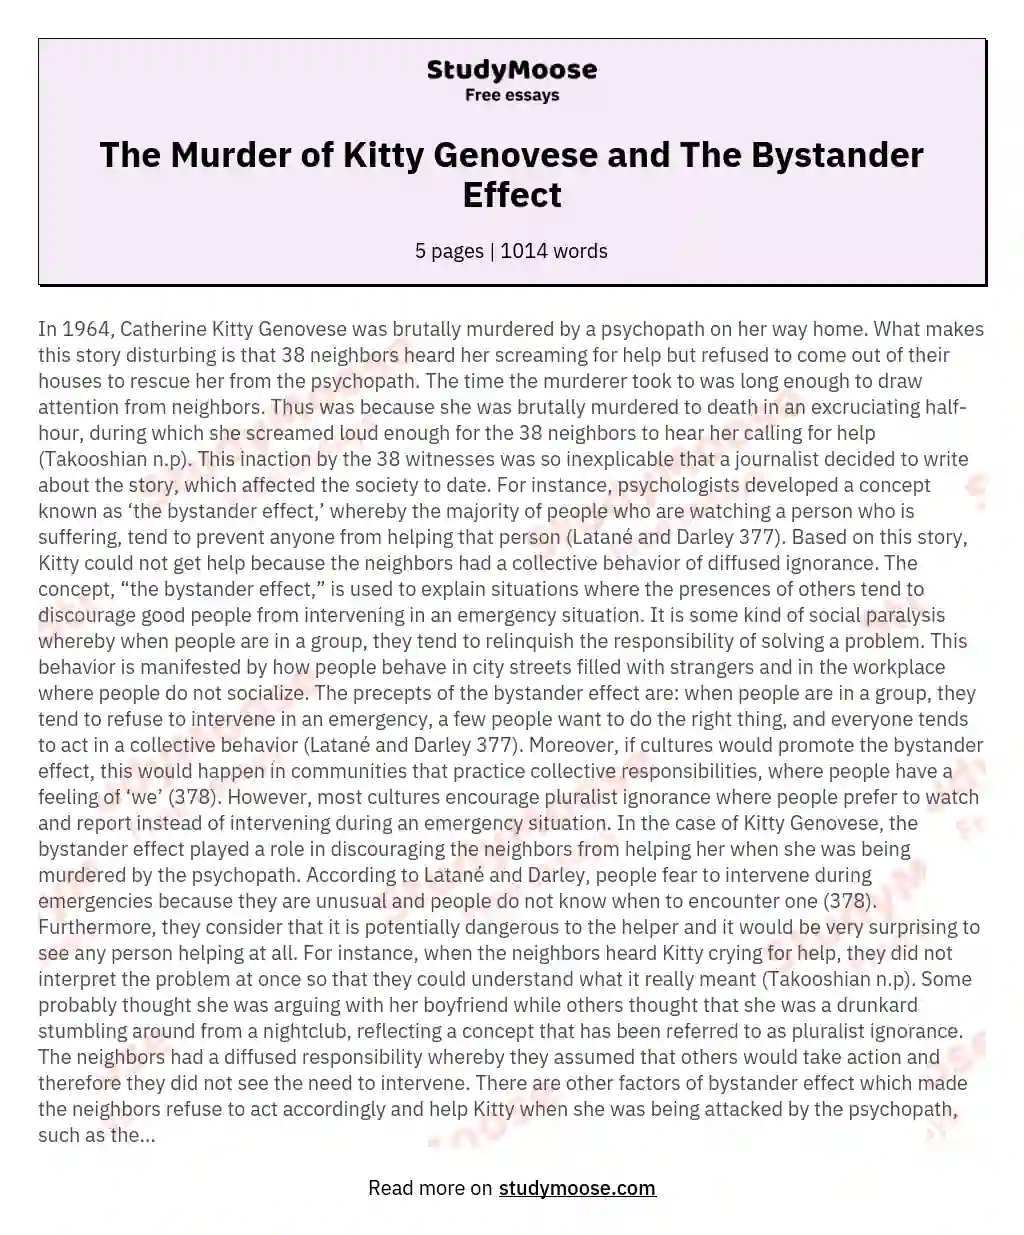 The Murder of Kitty Genovese and The Bystander Effect